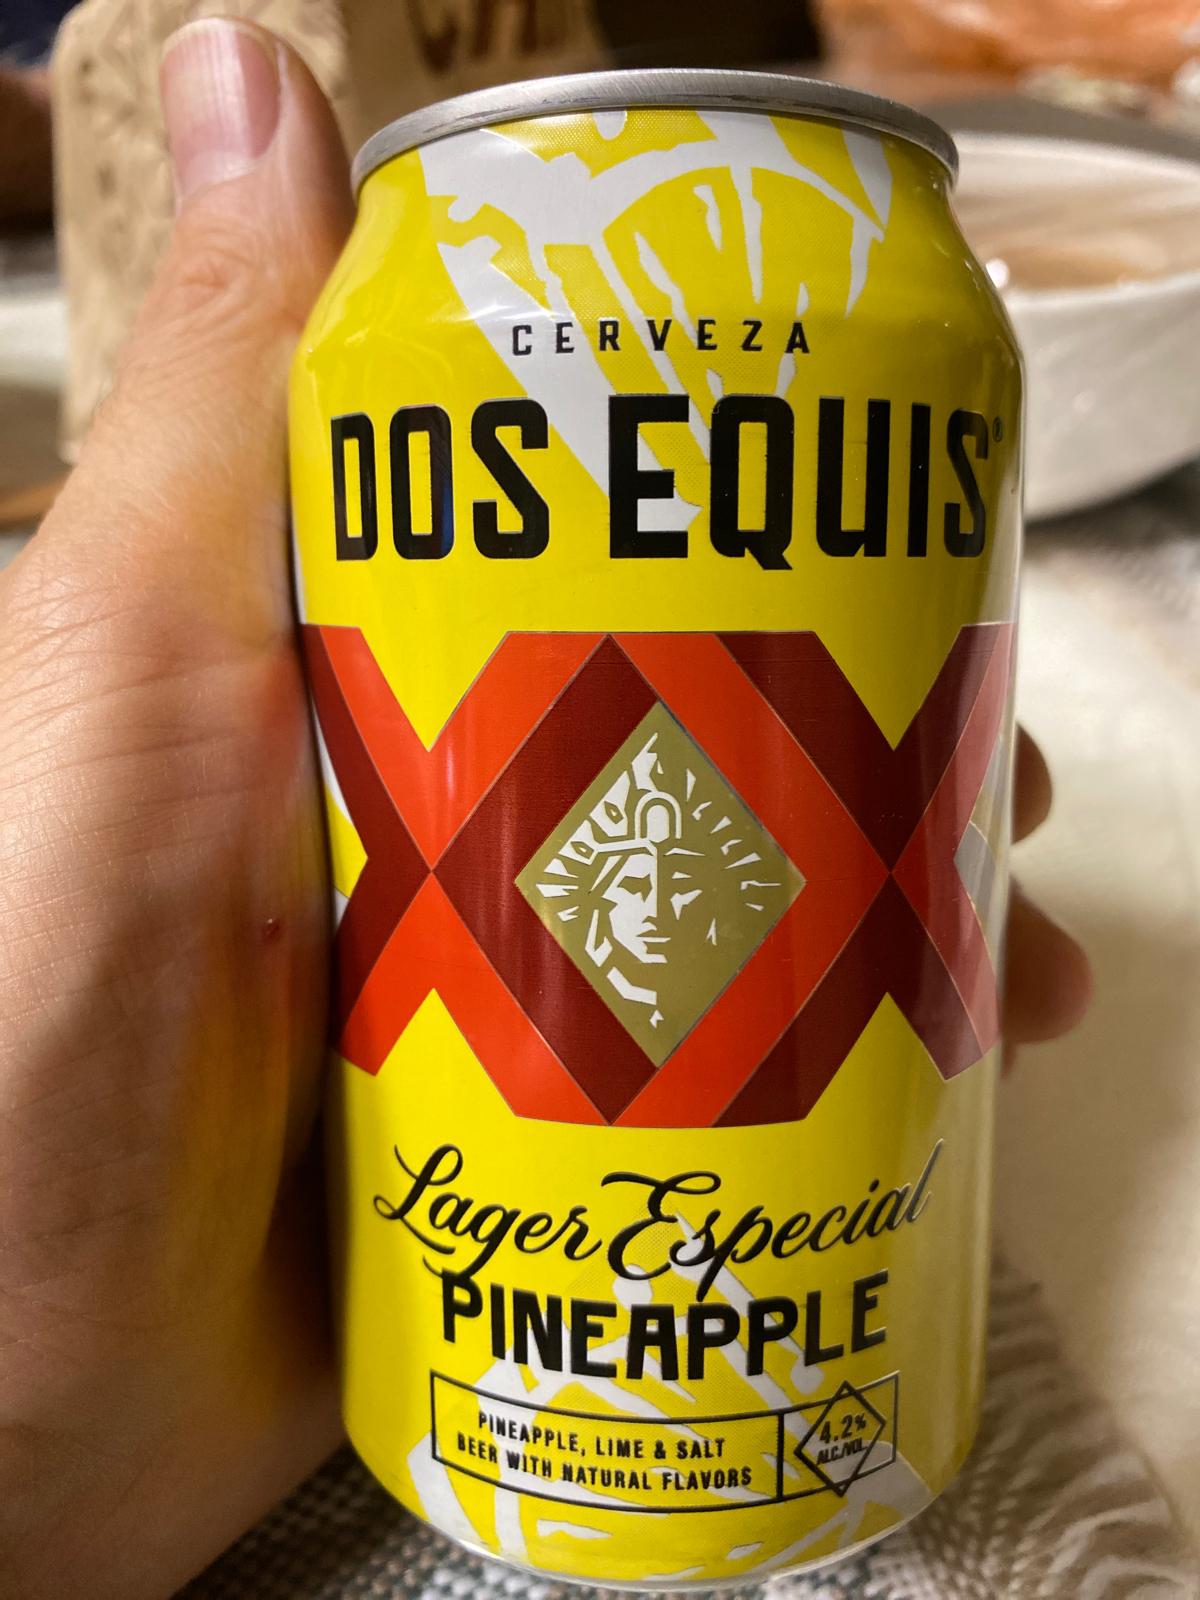 Dos Equis Lager Especial Pineapple